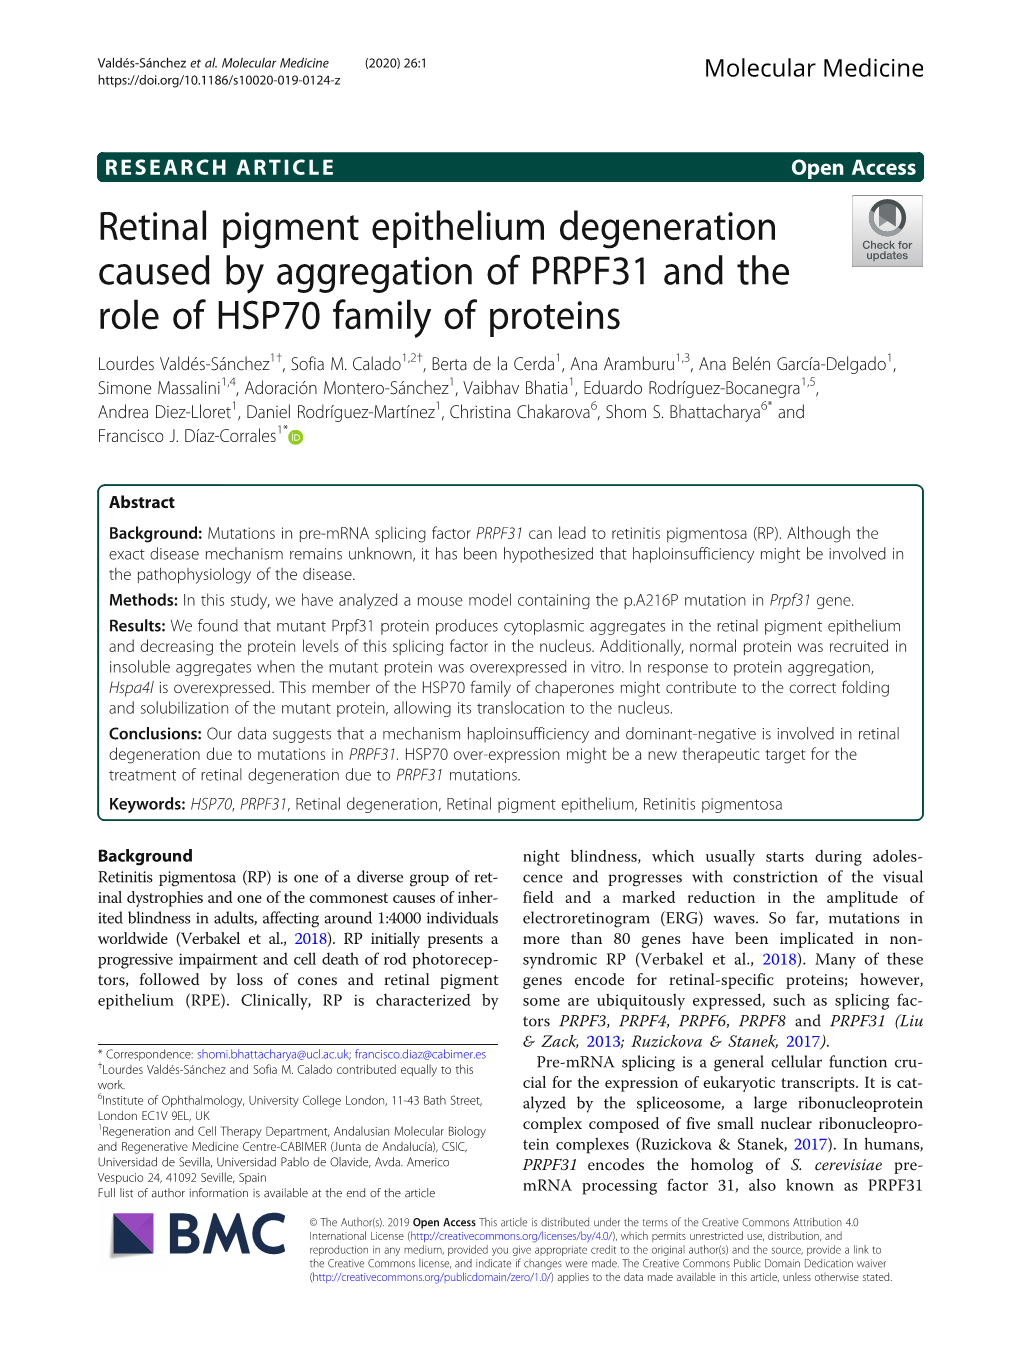 Retinal Pigment Epithelium Degeneration Caused by Aggregation of PRPF31 and the Role of HSP70 Family of Proteins Lourdes Valdés-Sánchez1†, Sofia M